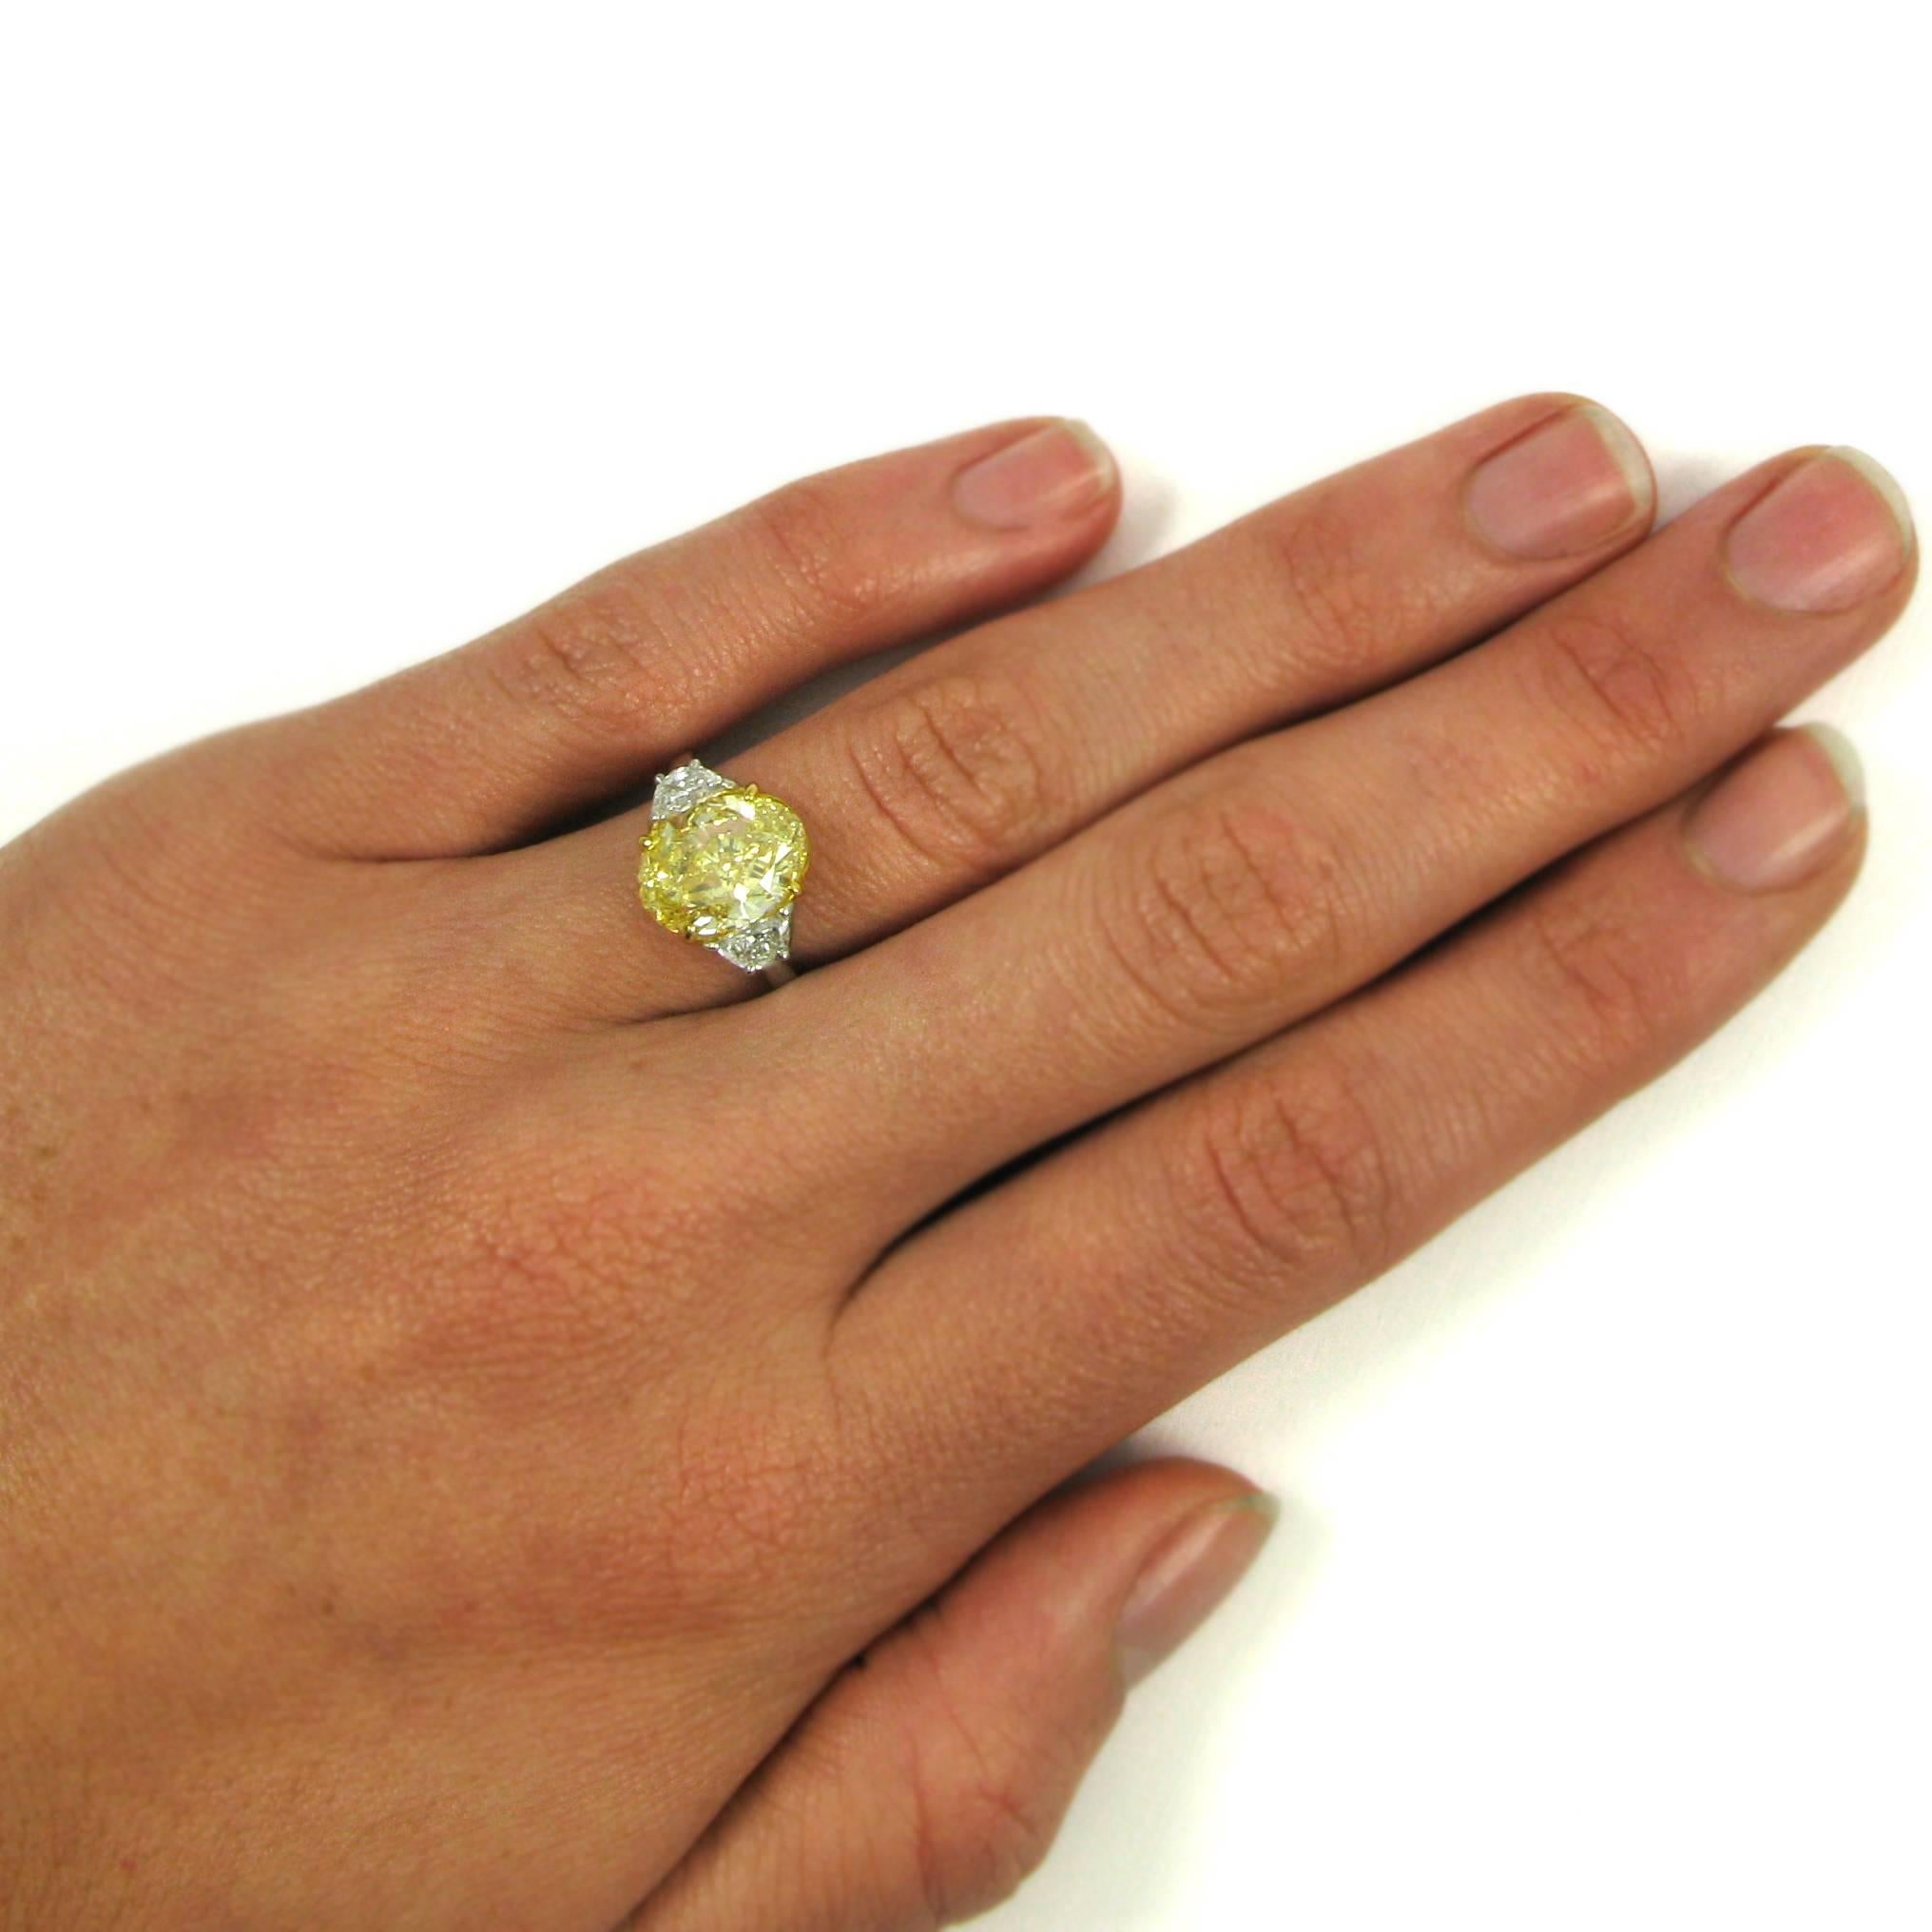 A lovely three-stone ring centering on a bright and cheerful Fancy Intense Yellow oval-cut diamond with VVS1 clarity. The yellow diamond is prong-set in 18k yellow gold, and is flanked by two white half-moon diamonds totaling approx. 0.70 carat.